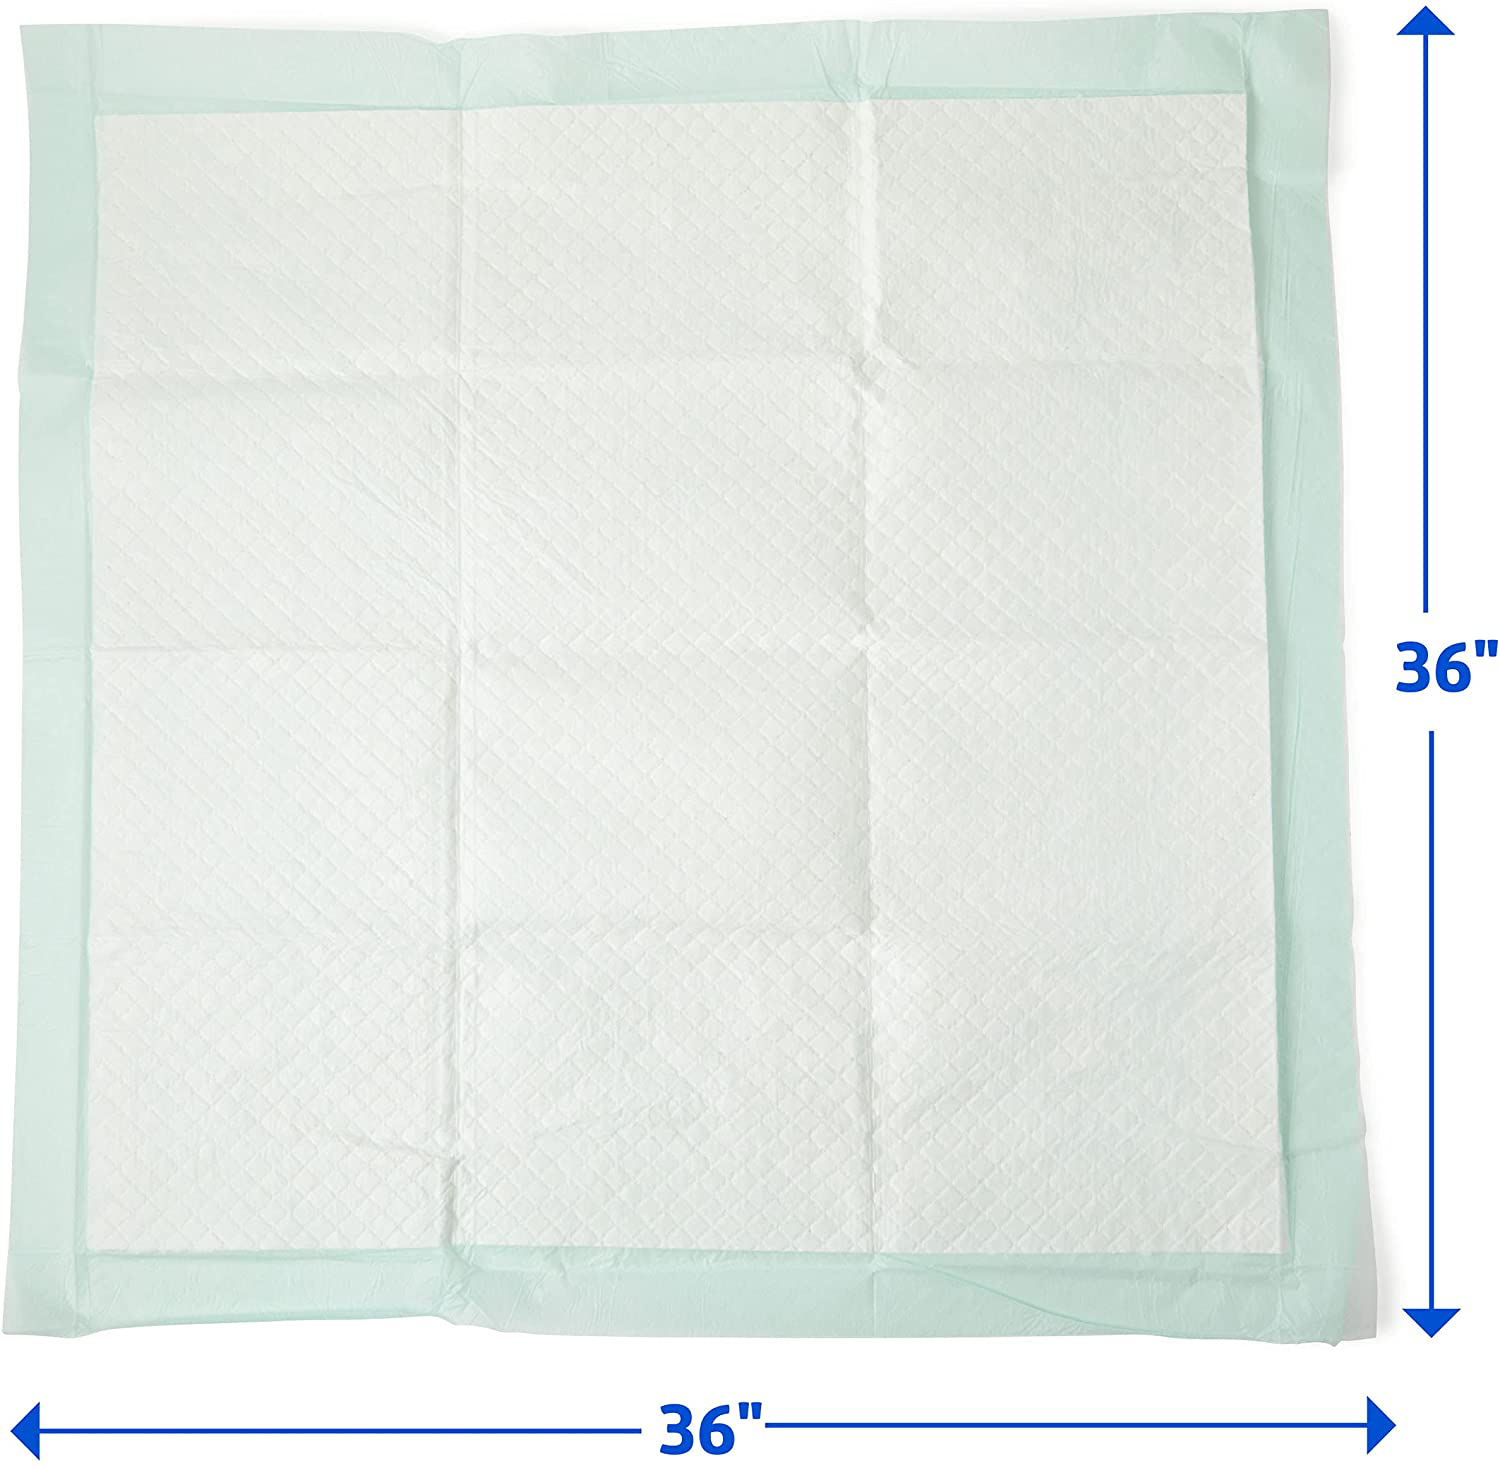 Medline Heavy Absorbency 36" X 36" Quilted Bed Pads, Large Disposable Underpads, 50 per Case, Fluff and Polymer Core, Great Protection for Beds, Furniture, Surfaces